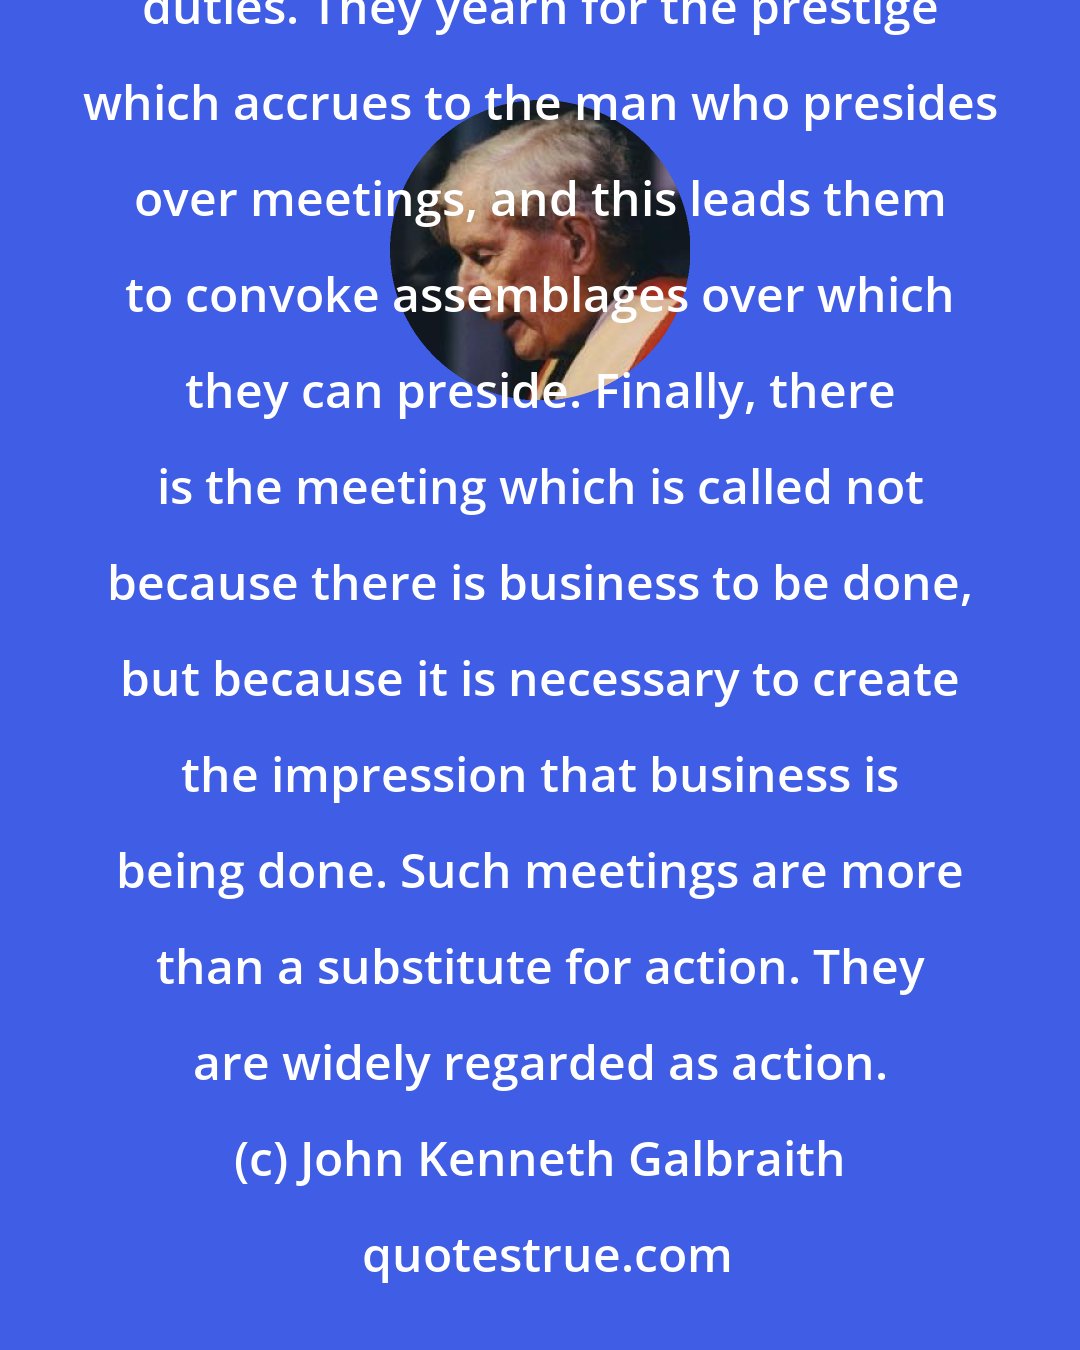 John Kenneth Galbraith: Meetings are held because men seek companionship or, at a minimum, wish to escape the tedium of solitary duties. They yearn for the prestige which accrues to the man who presides over meetings, and this leads them to convoke assemblages over which they can preside. Finally, there is the meeting which is called not because there is business to be done, but because it is necessary to create the impression that business is being done. Such meetings are more than a substitute for action. They are widely regarded as action.